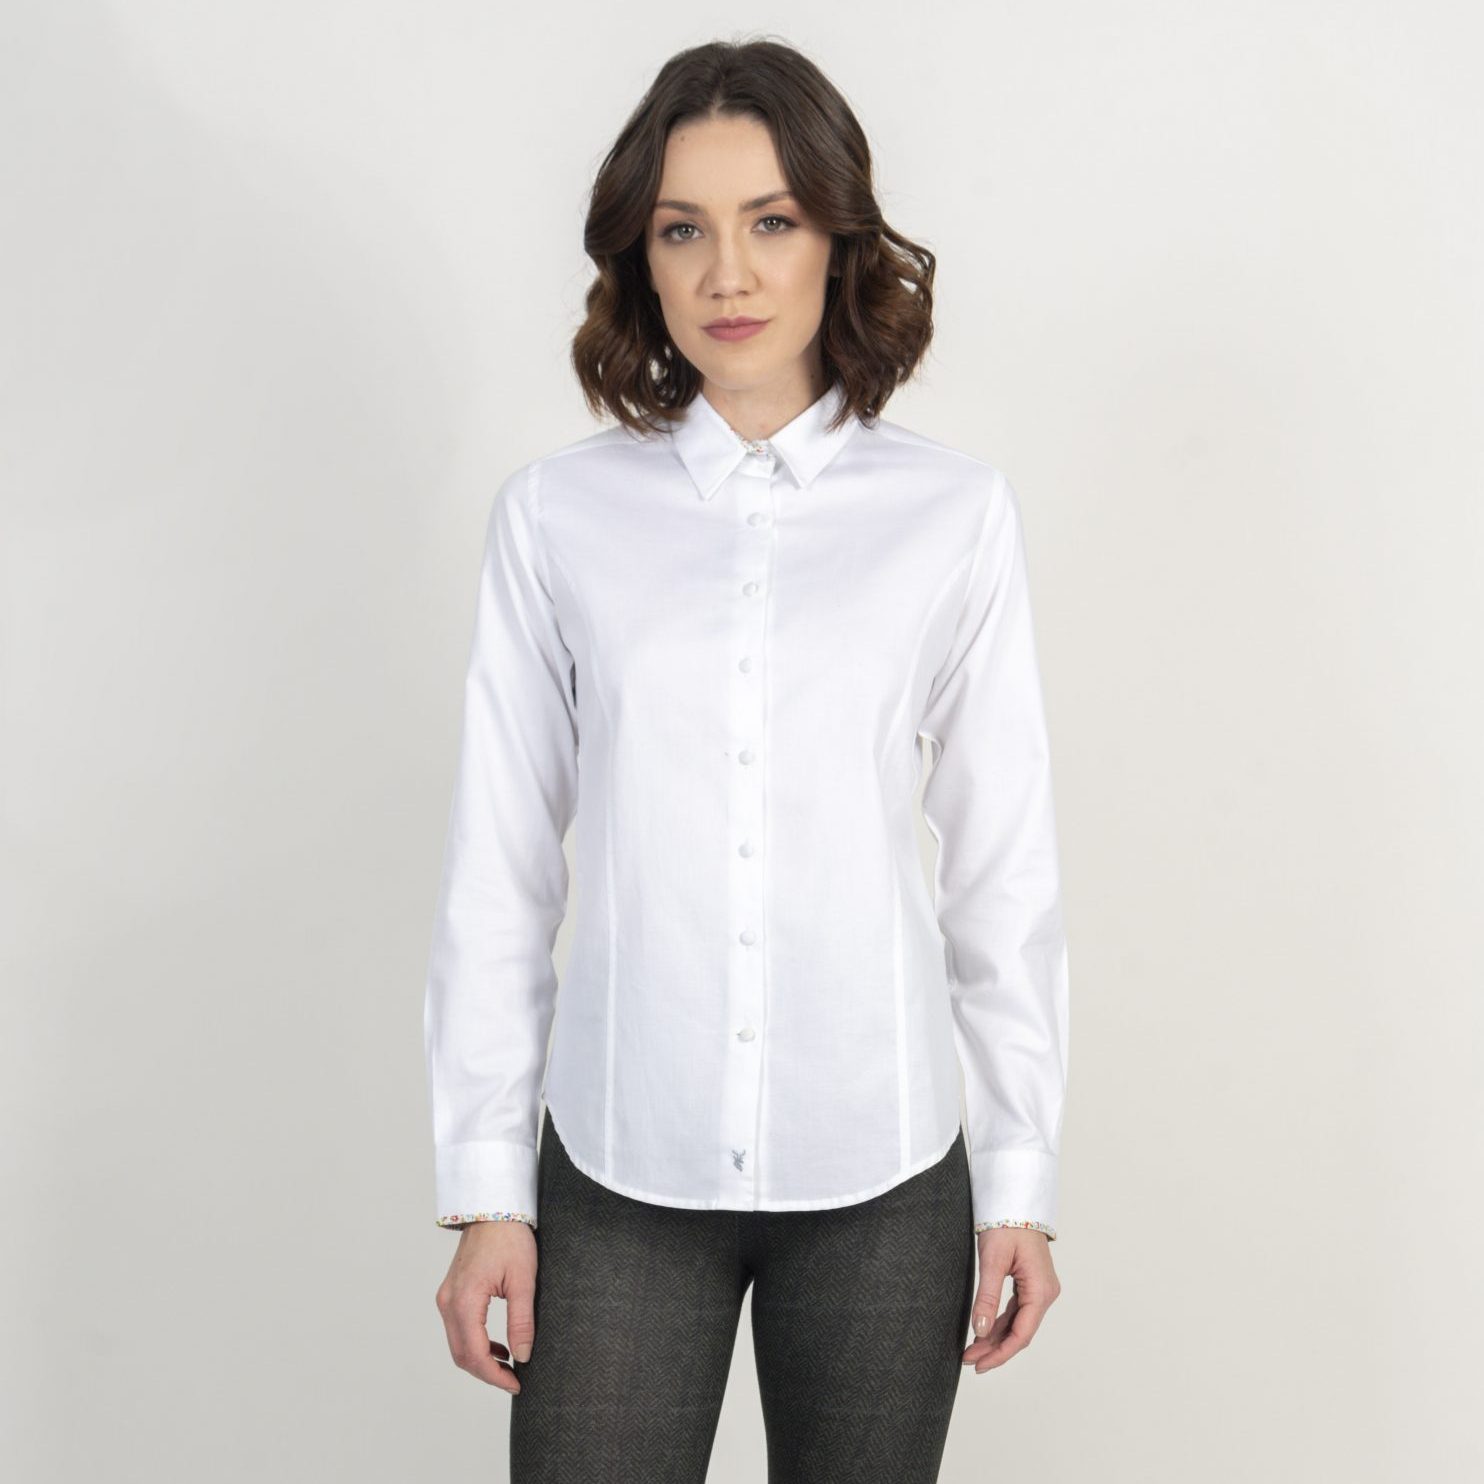 Hartwell Zoe Shirt - White - Ruffords Country Store